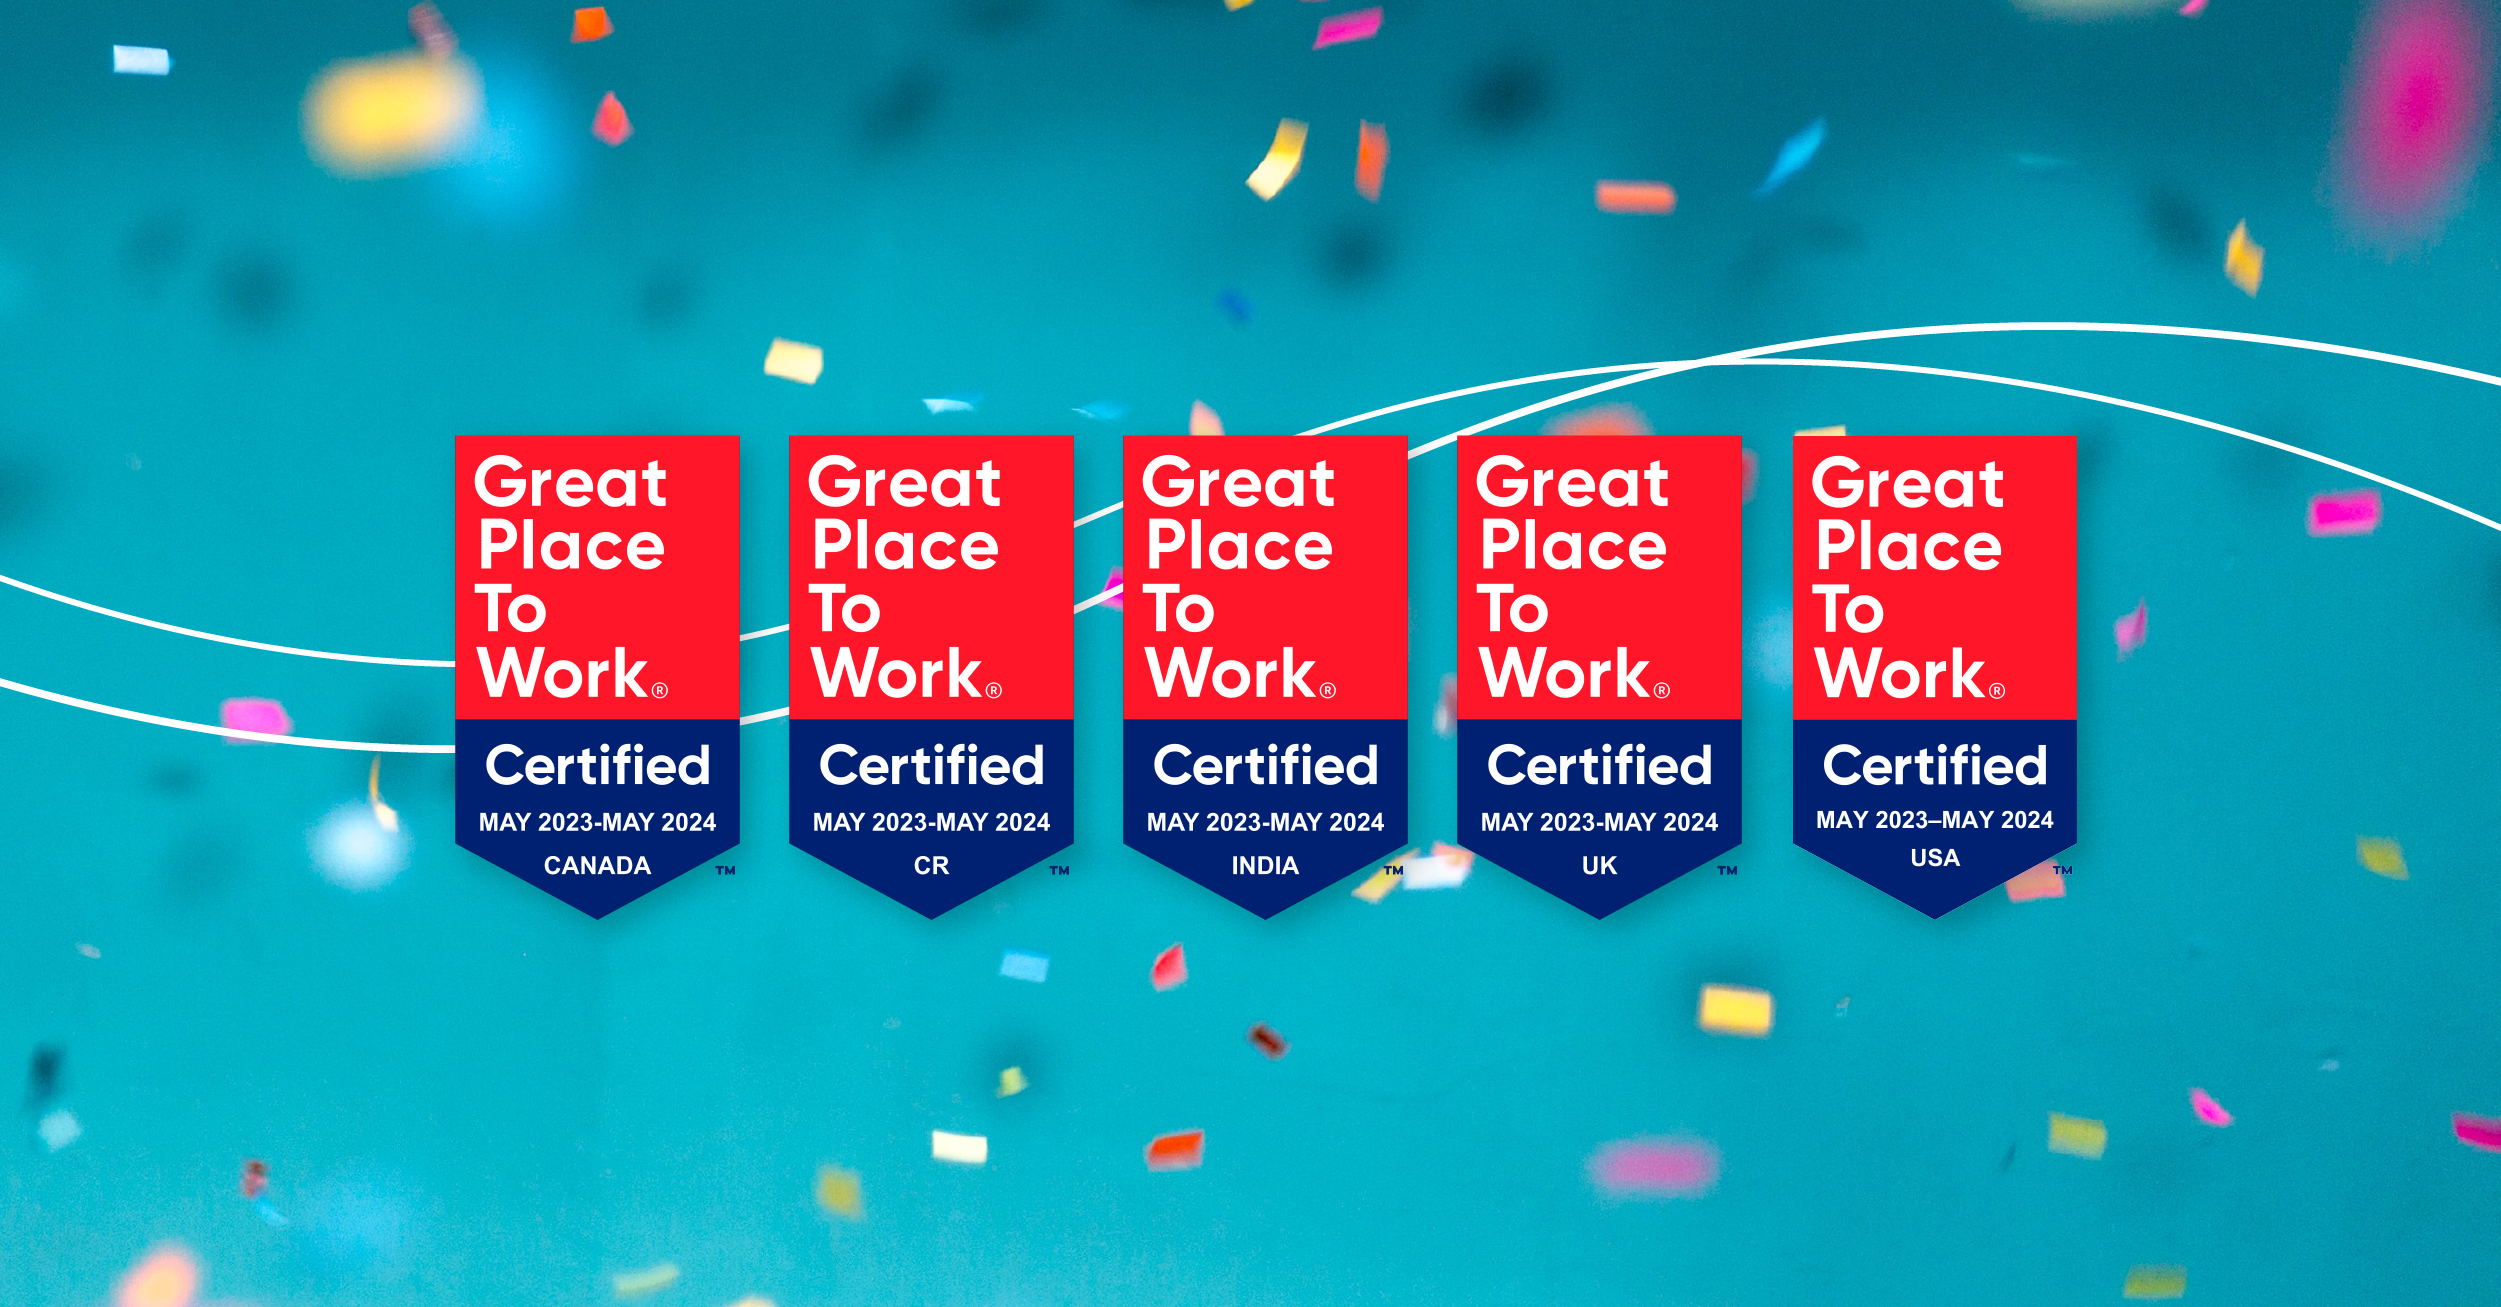 Great Place to Work banners for Canada, Costa Rica, India, UK, USA. 